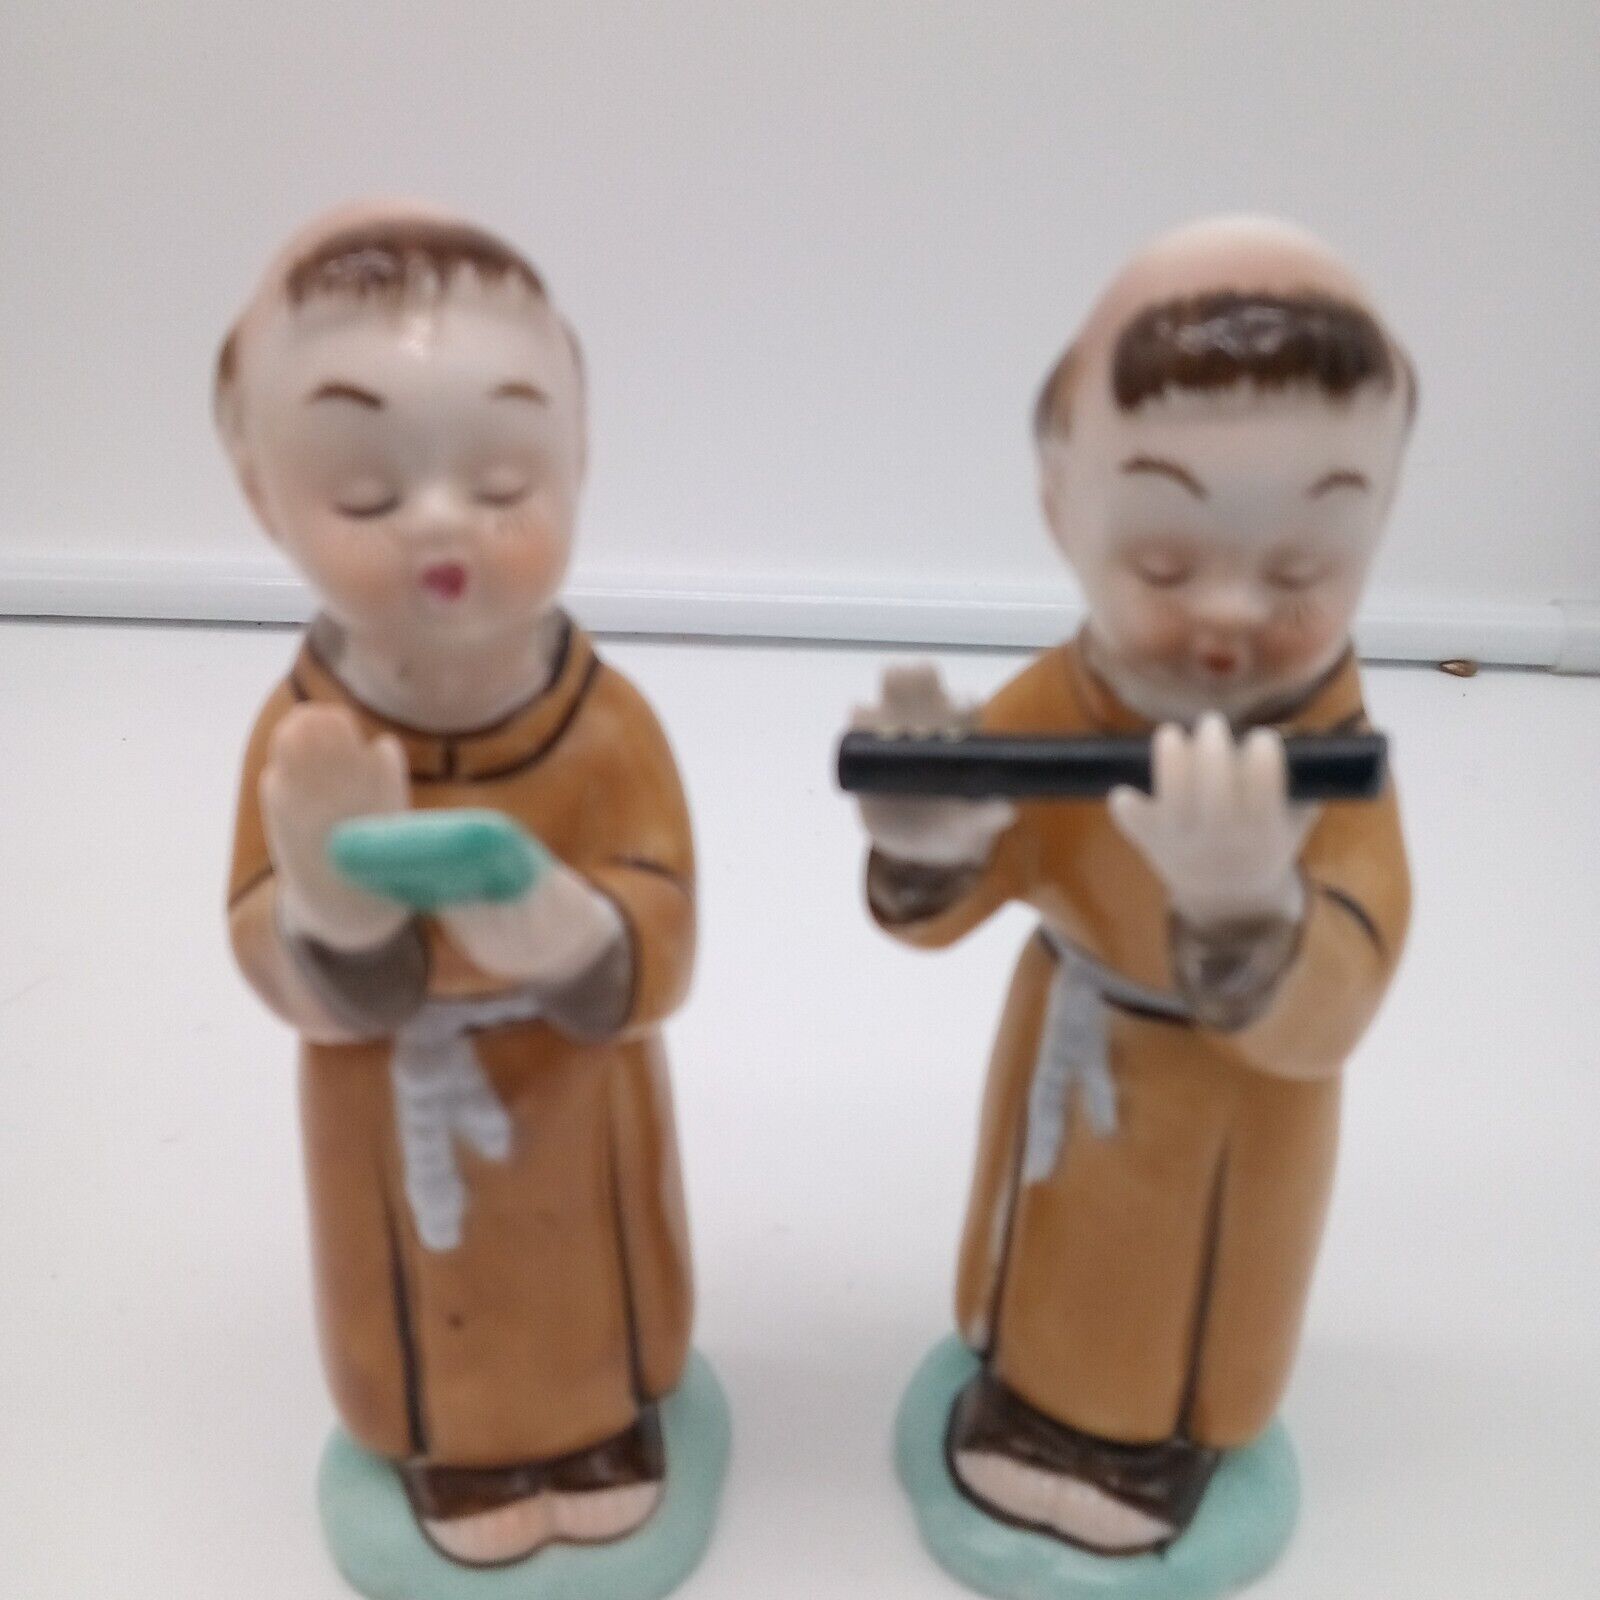 2 VINTAGE MONK PORCELAIN FIGURINES ONE PLAYING FLUTE ONE MUSIC CONDUCTOR